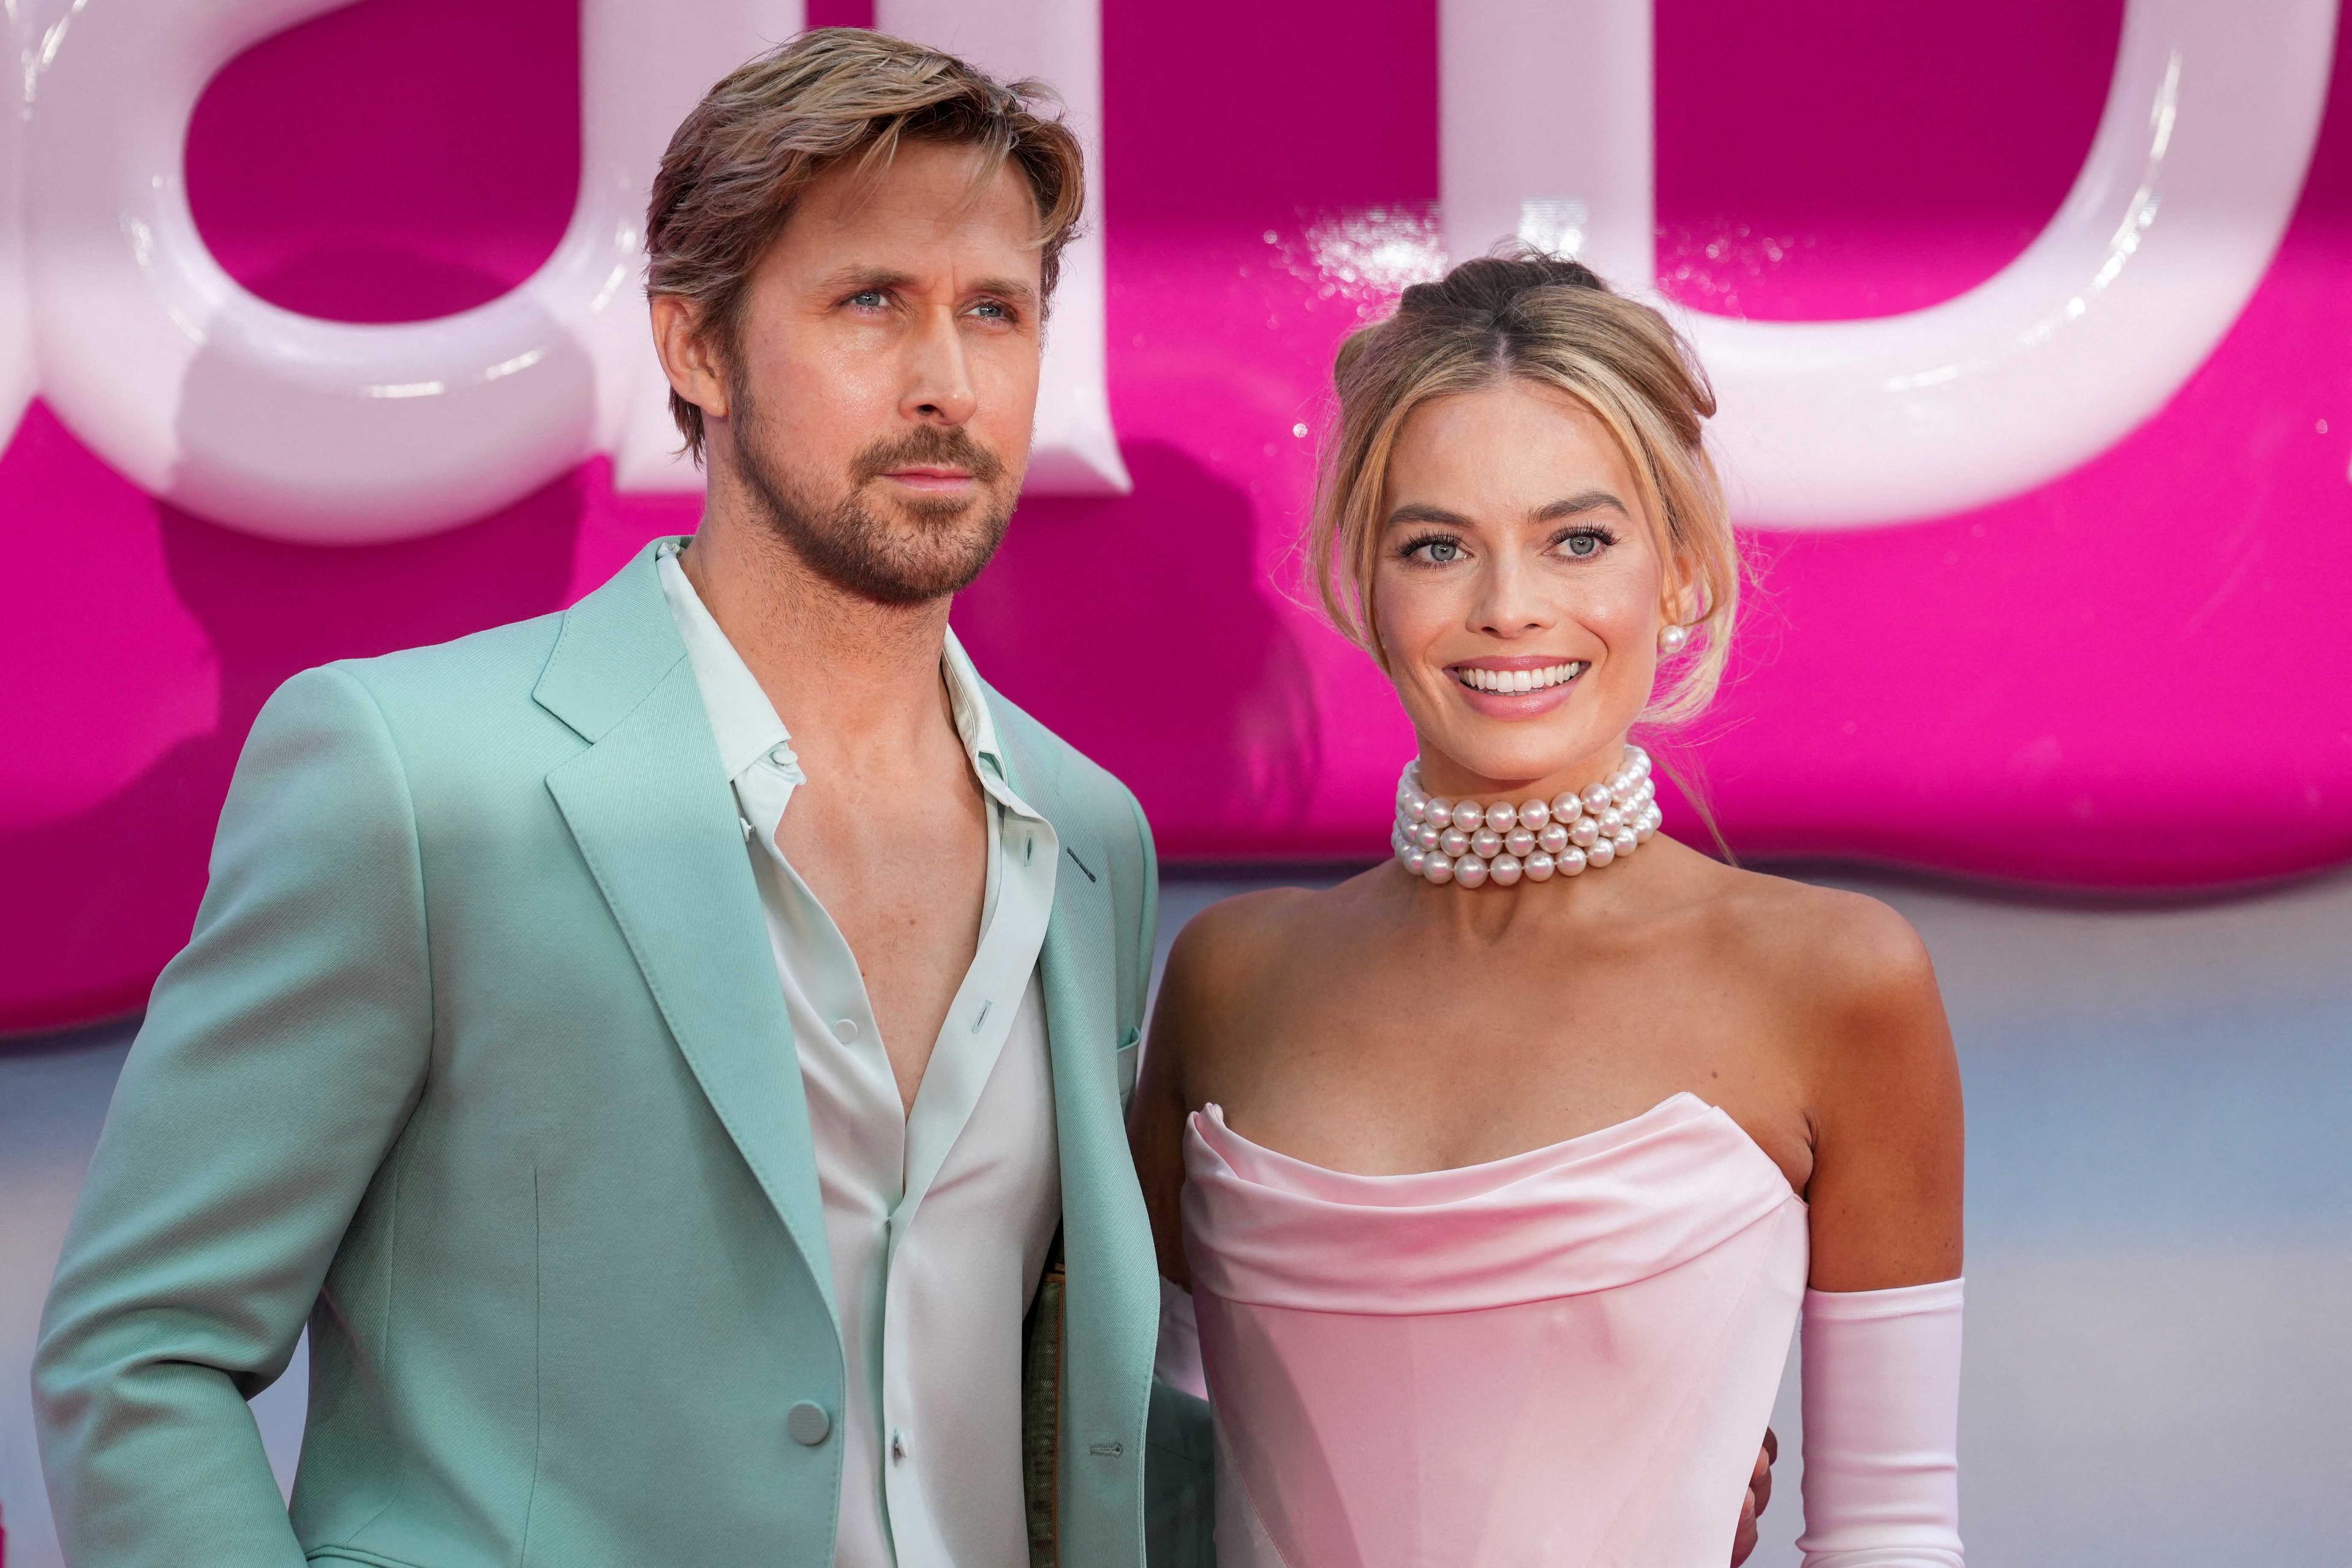 Margot Robbie and Ryan Gosling attend the European premiere of 'Barbie' in London, Britain July 12. Photo: Reuters